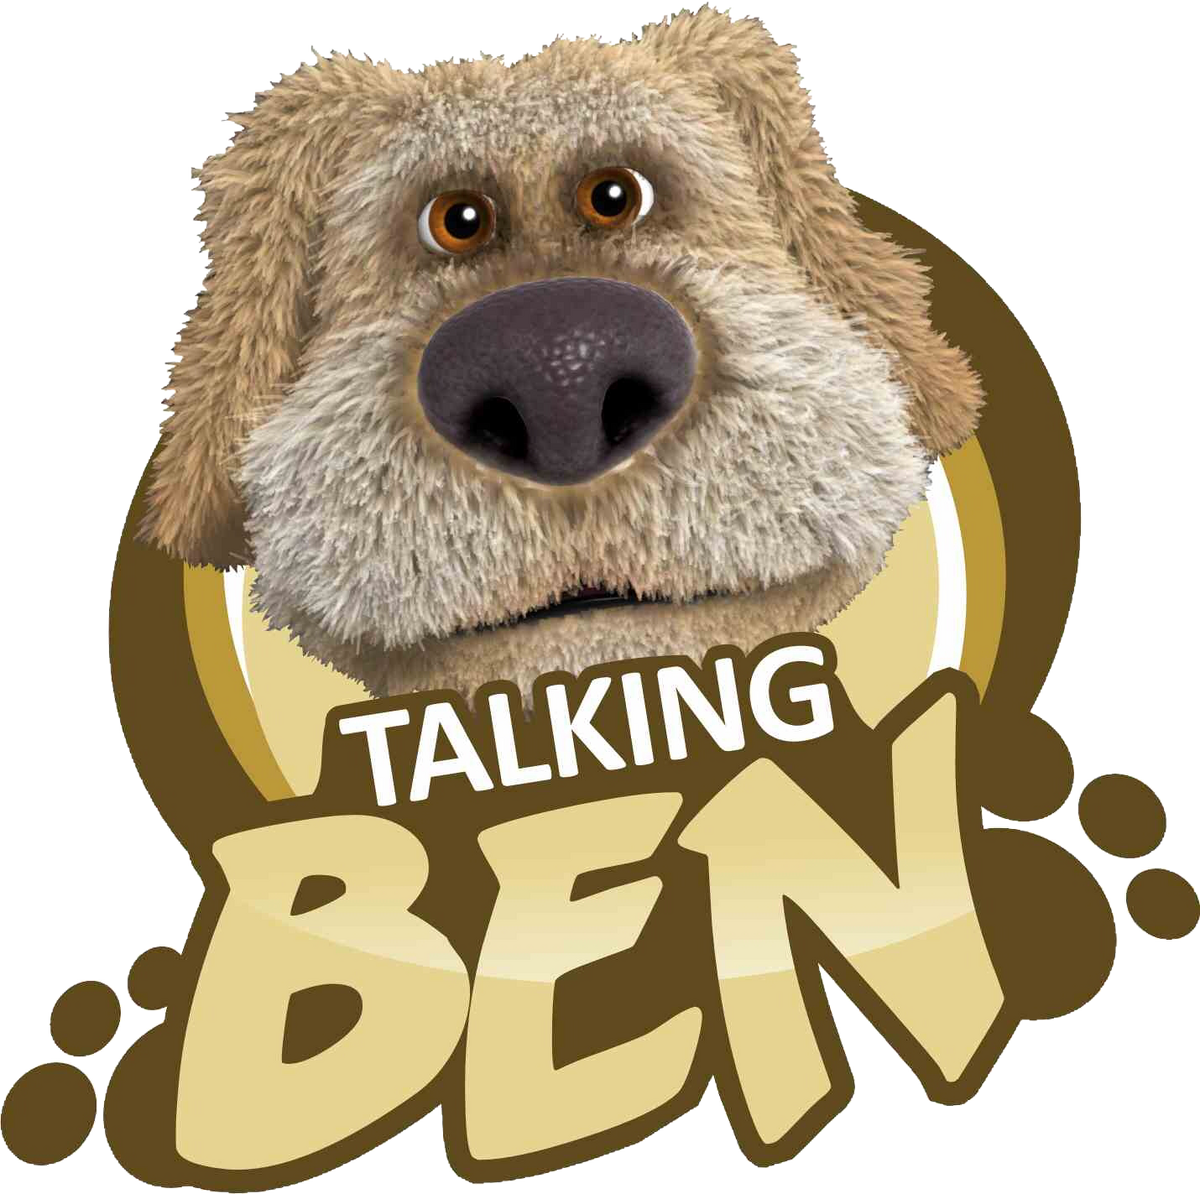 Talking Ben Background Explore more Animal, Animted, Cute, Dog